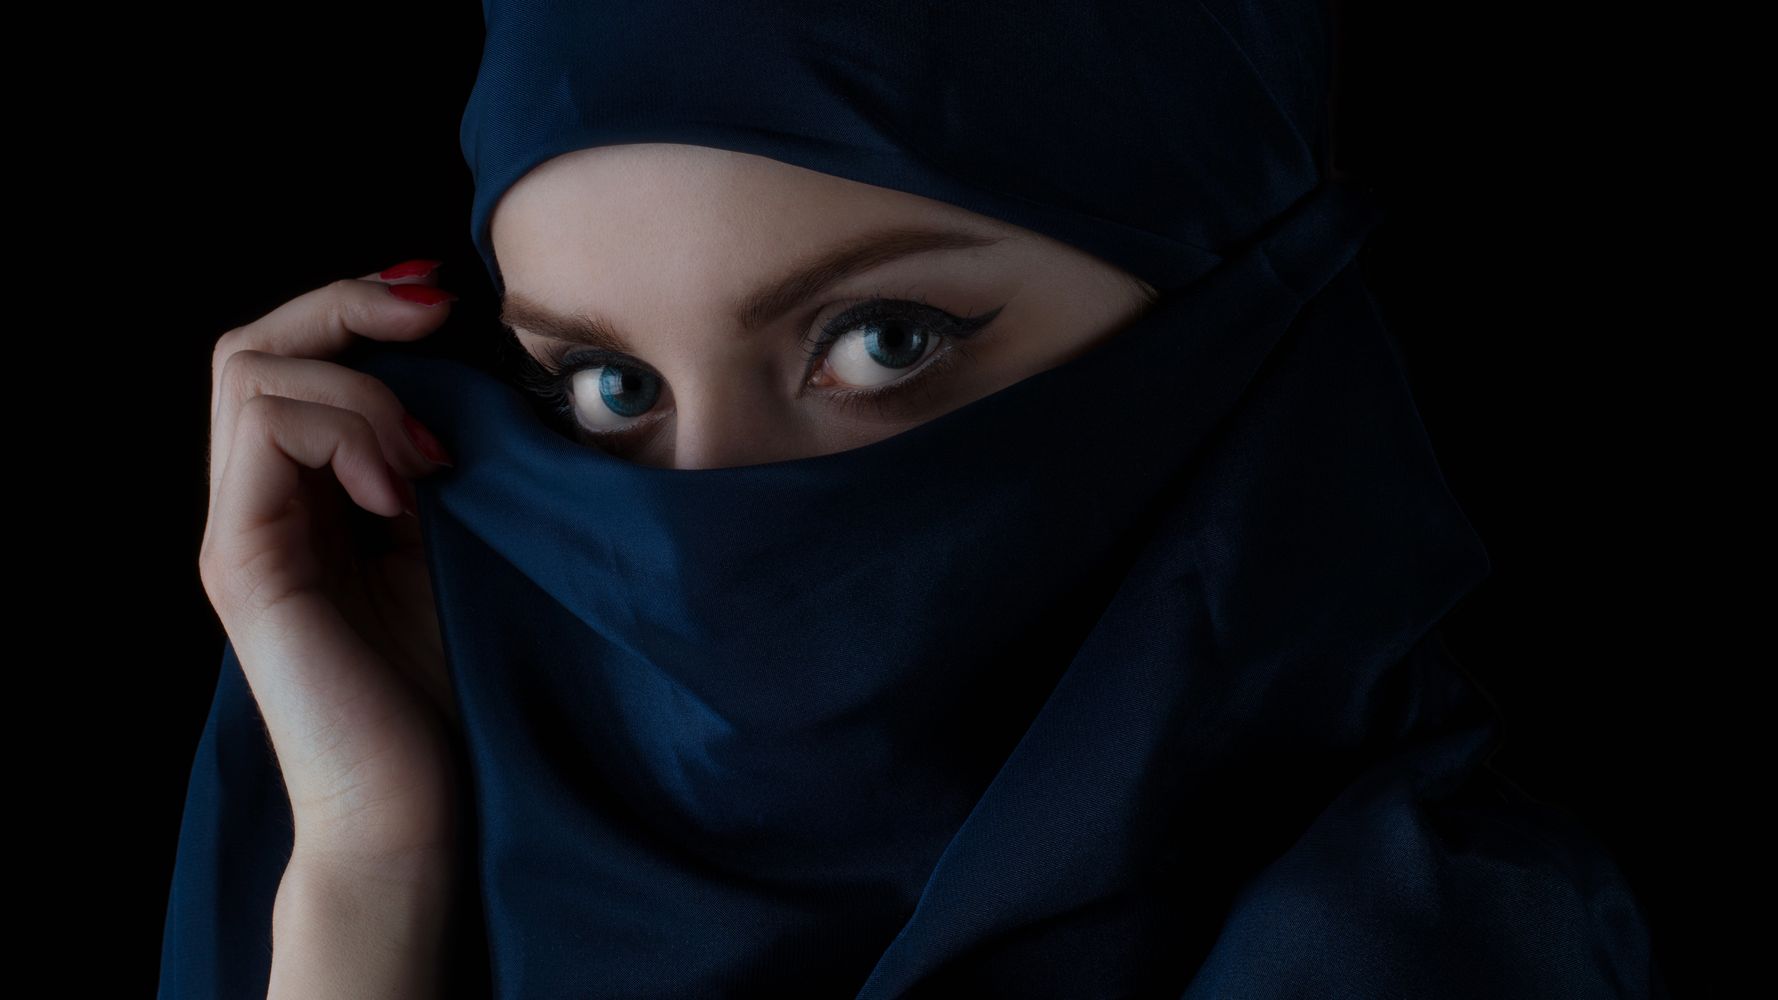 Mind Blowing Halal Sex Manual For Muslim Women Hits The Shelves Huffpost Null